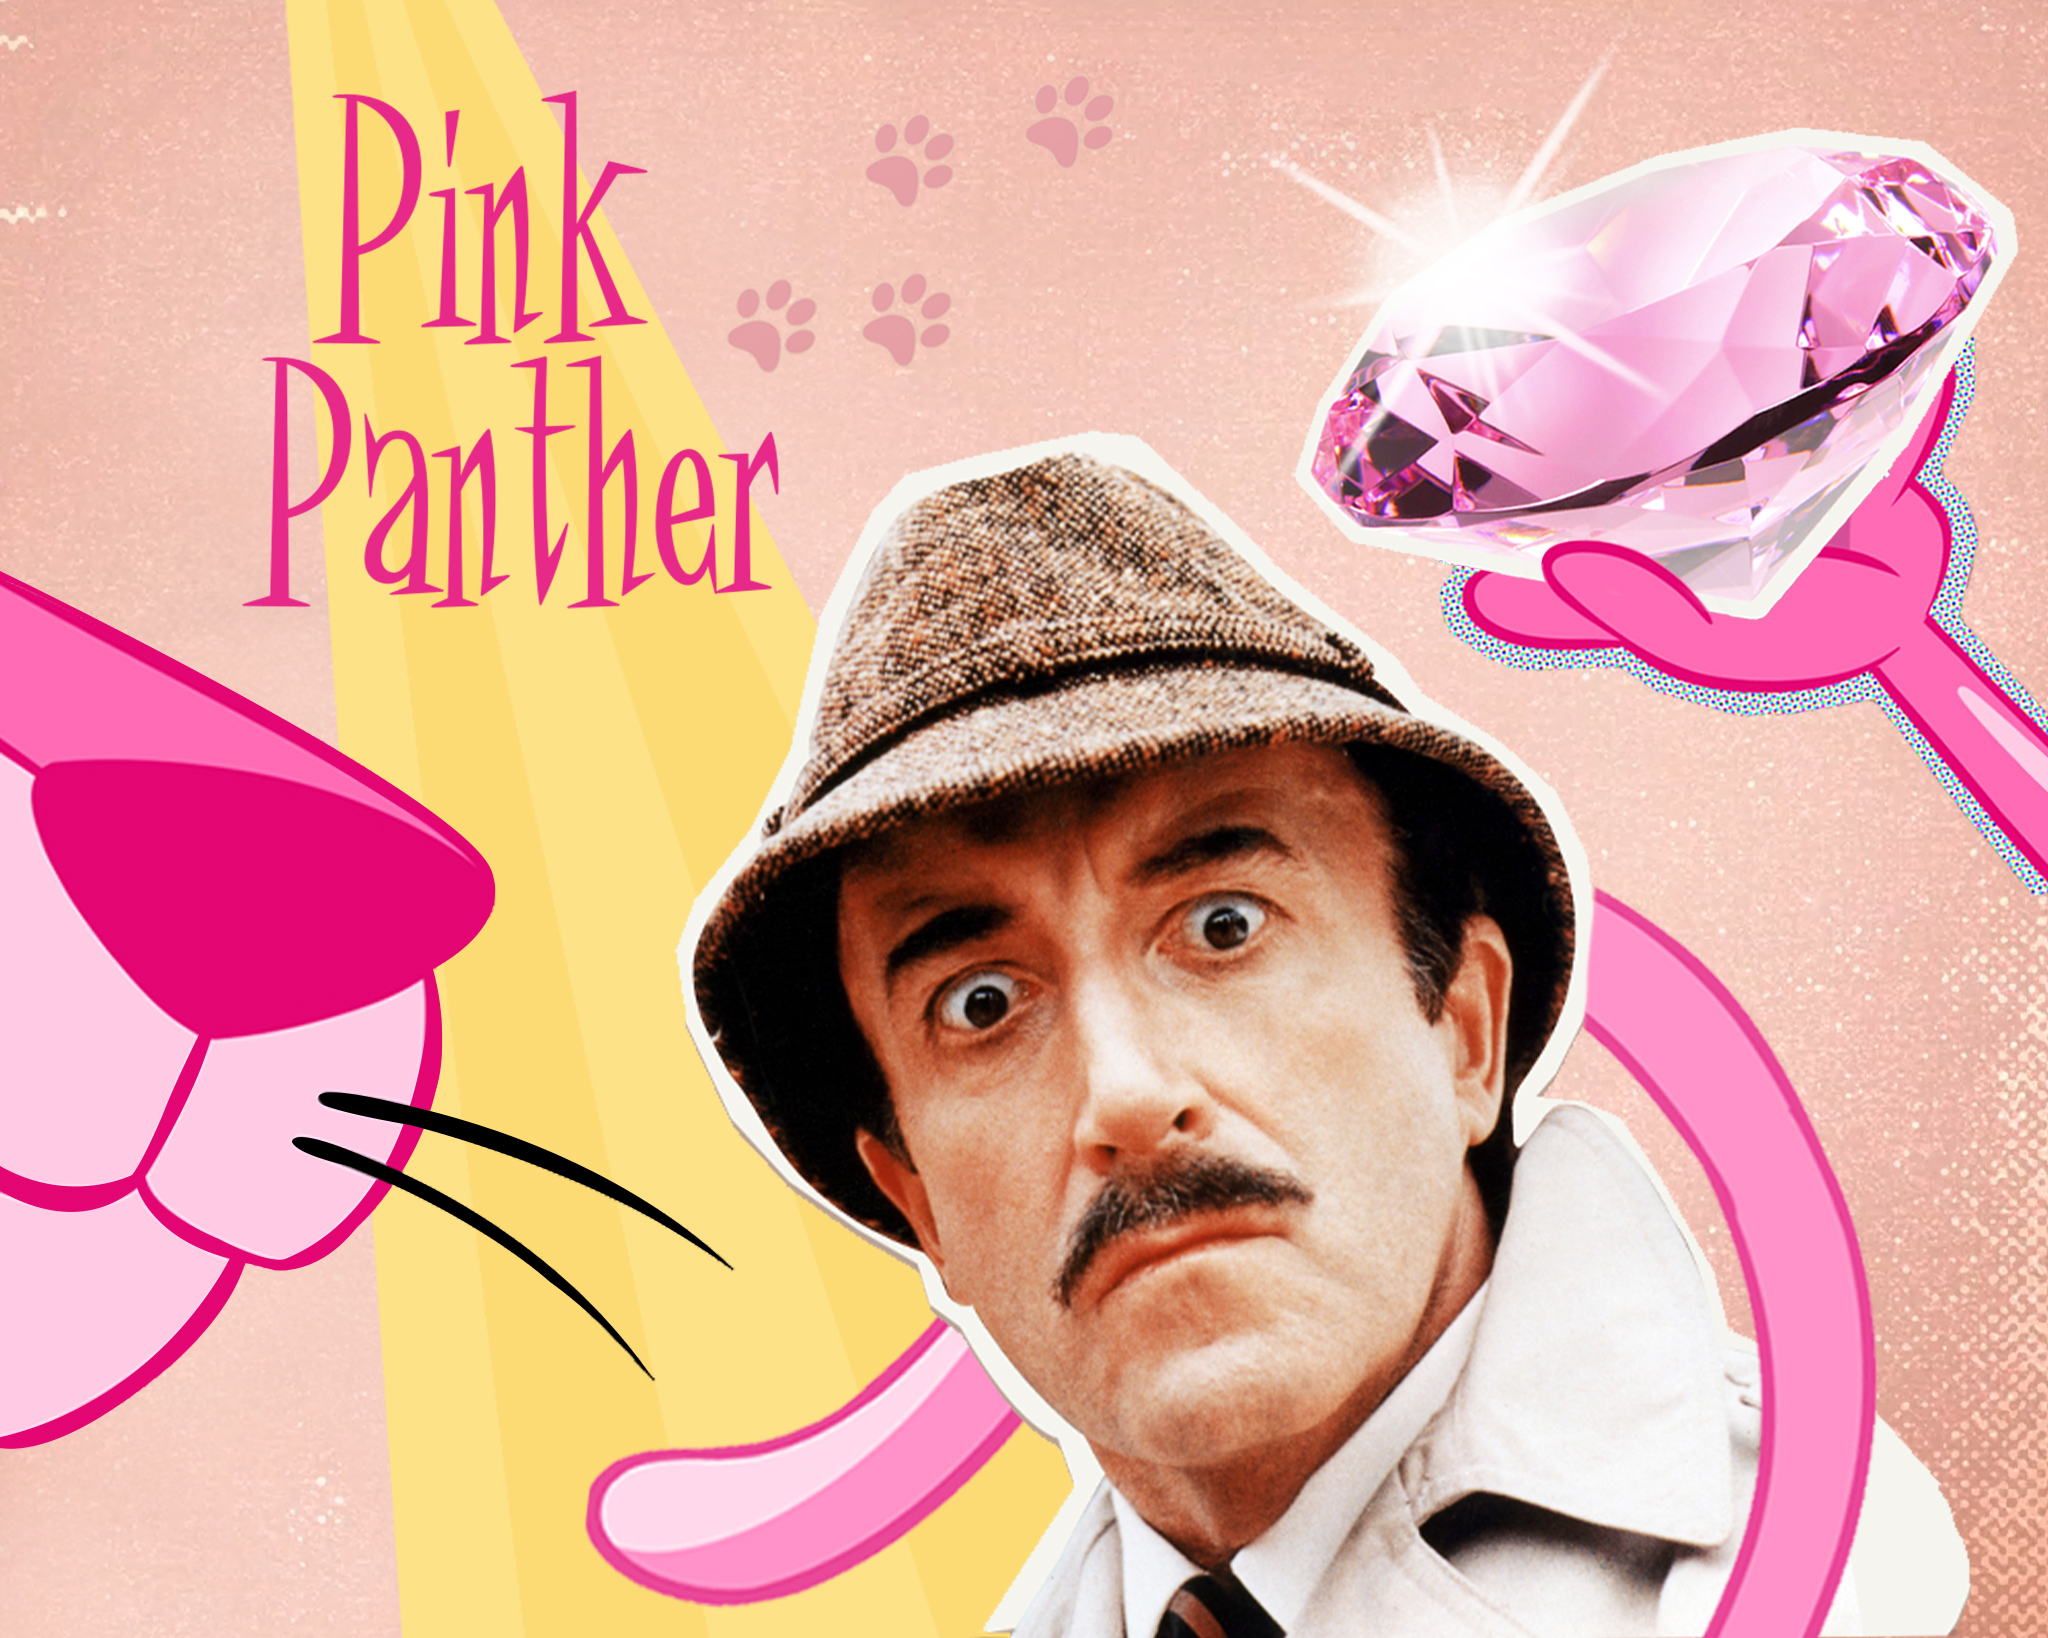 The Pink Panther, a comedy where a jewel thief and his nephew conspire to steal the world’s largest diamond